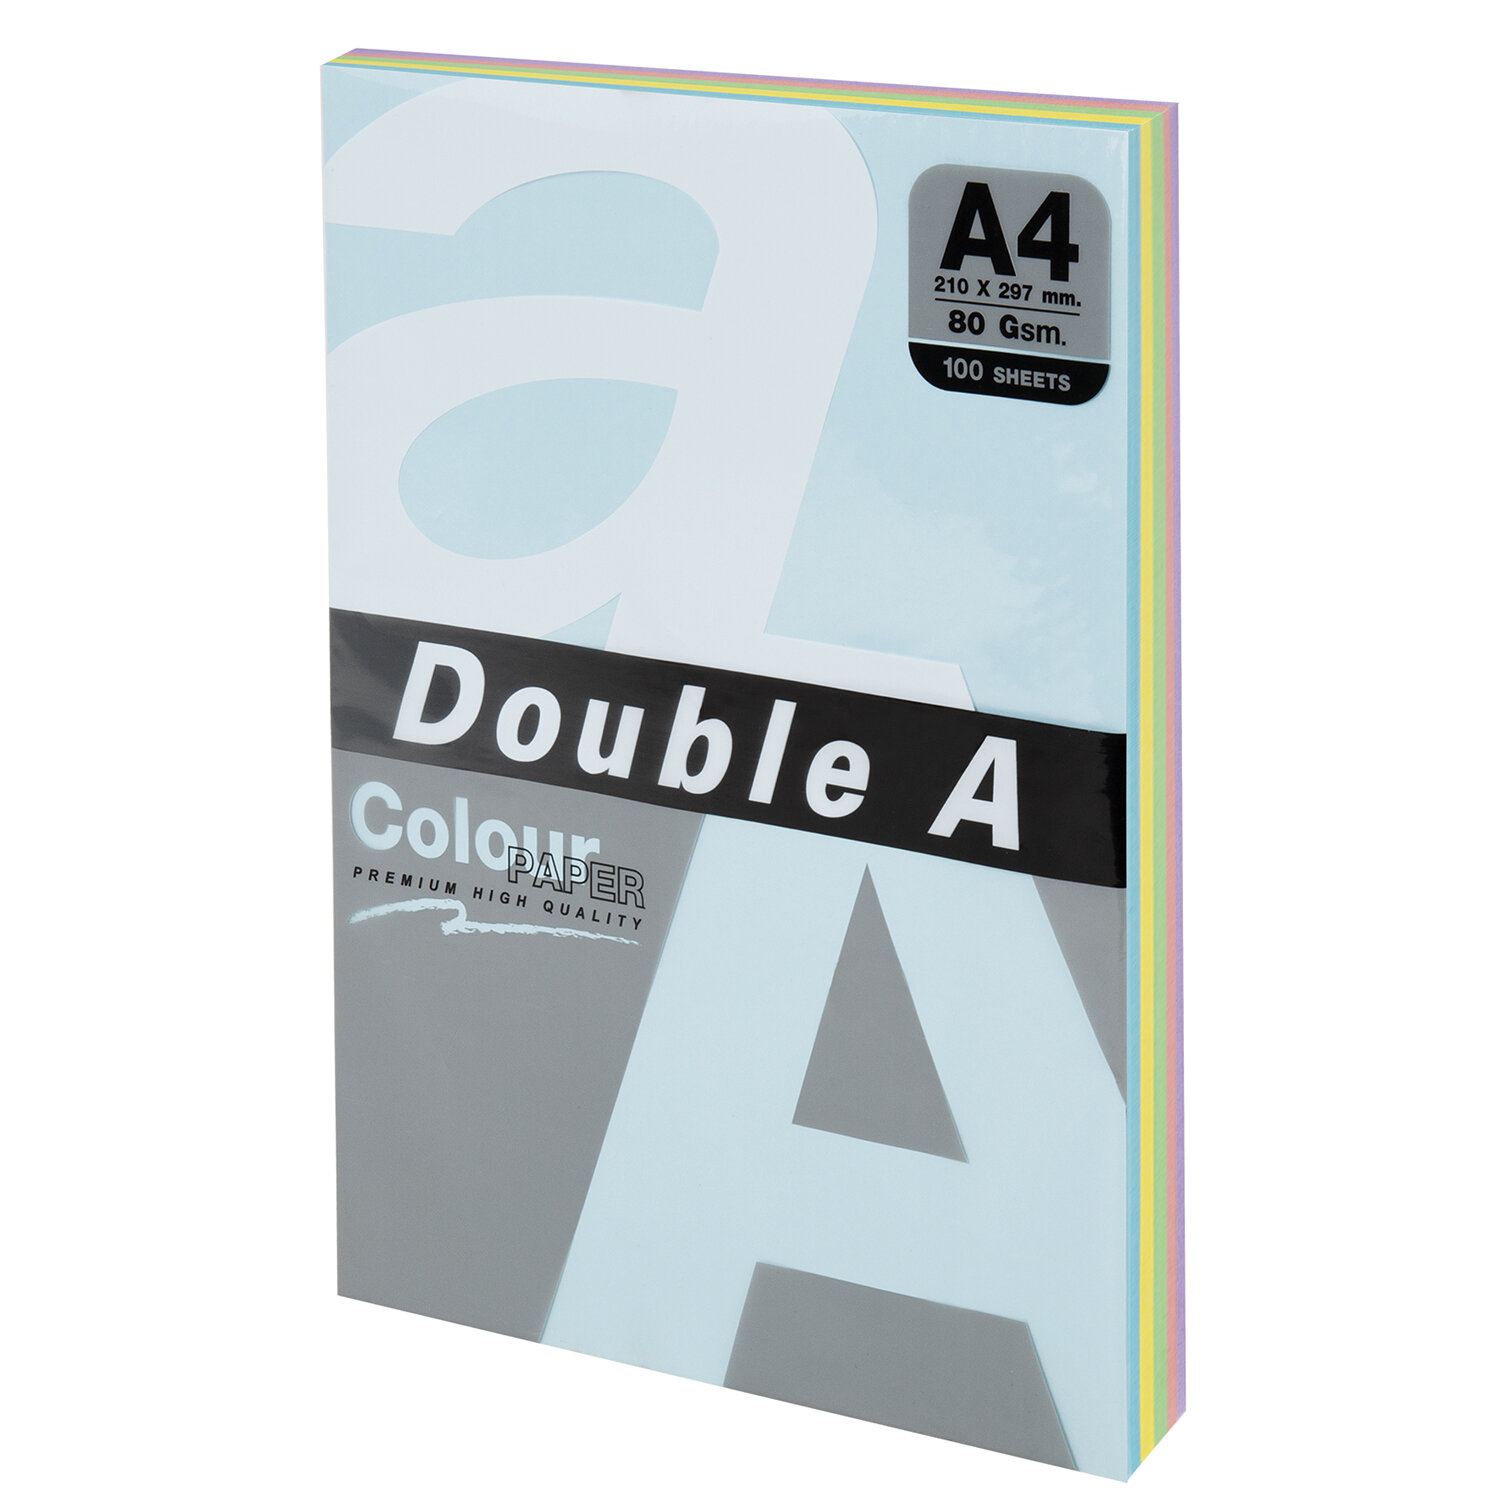  DOUBLE A 4, 80 /2, 100 .,  ,  4 .